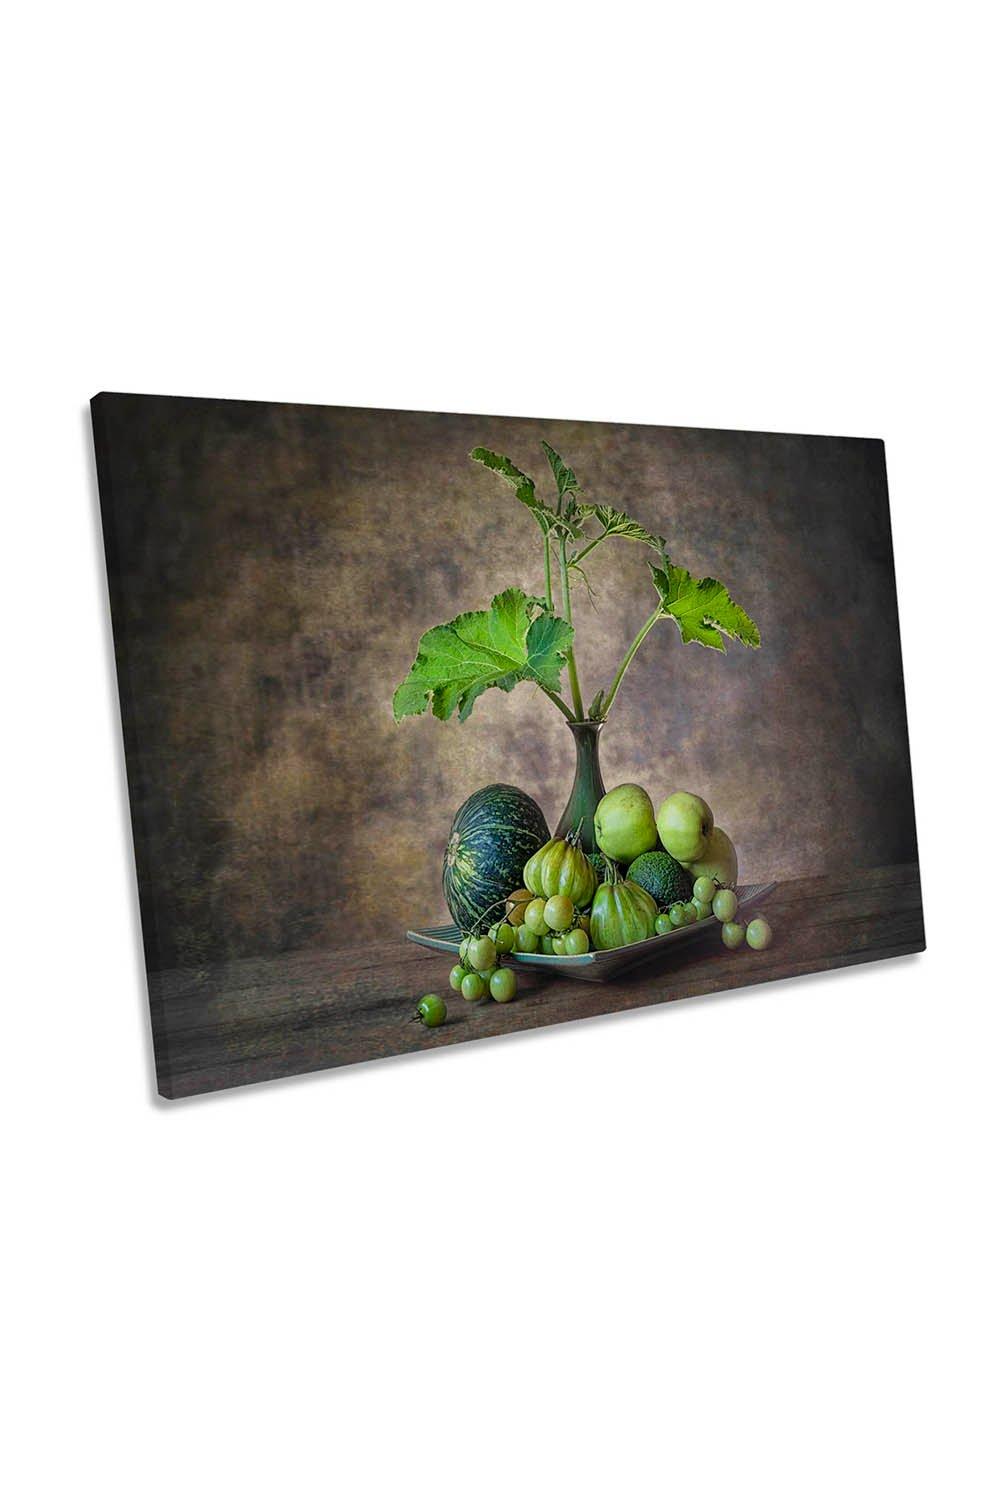 Greens from the Garden Floral Still Life Canvas Wall Art Picture Print